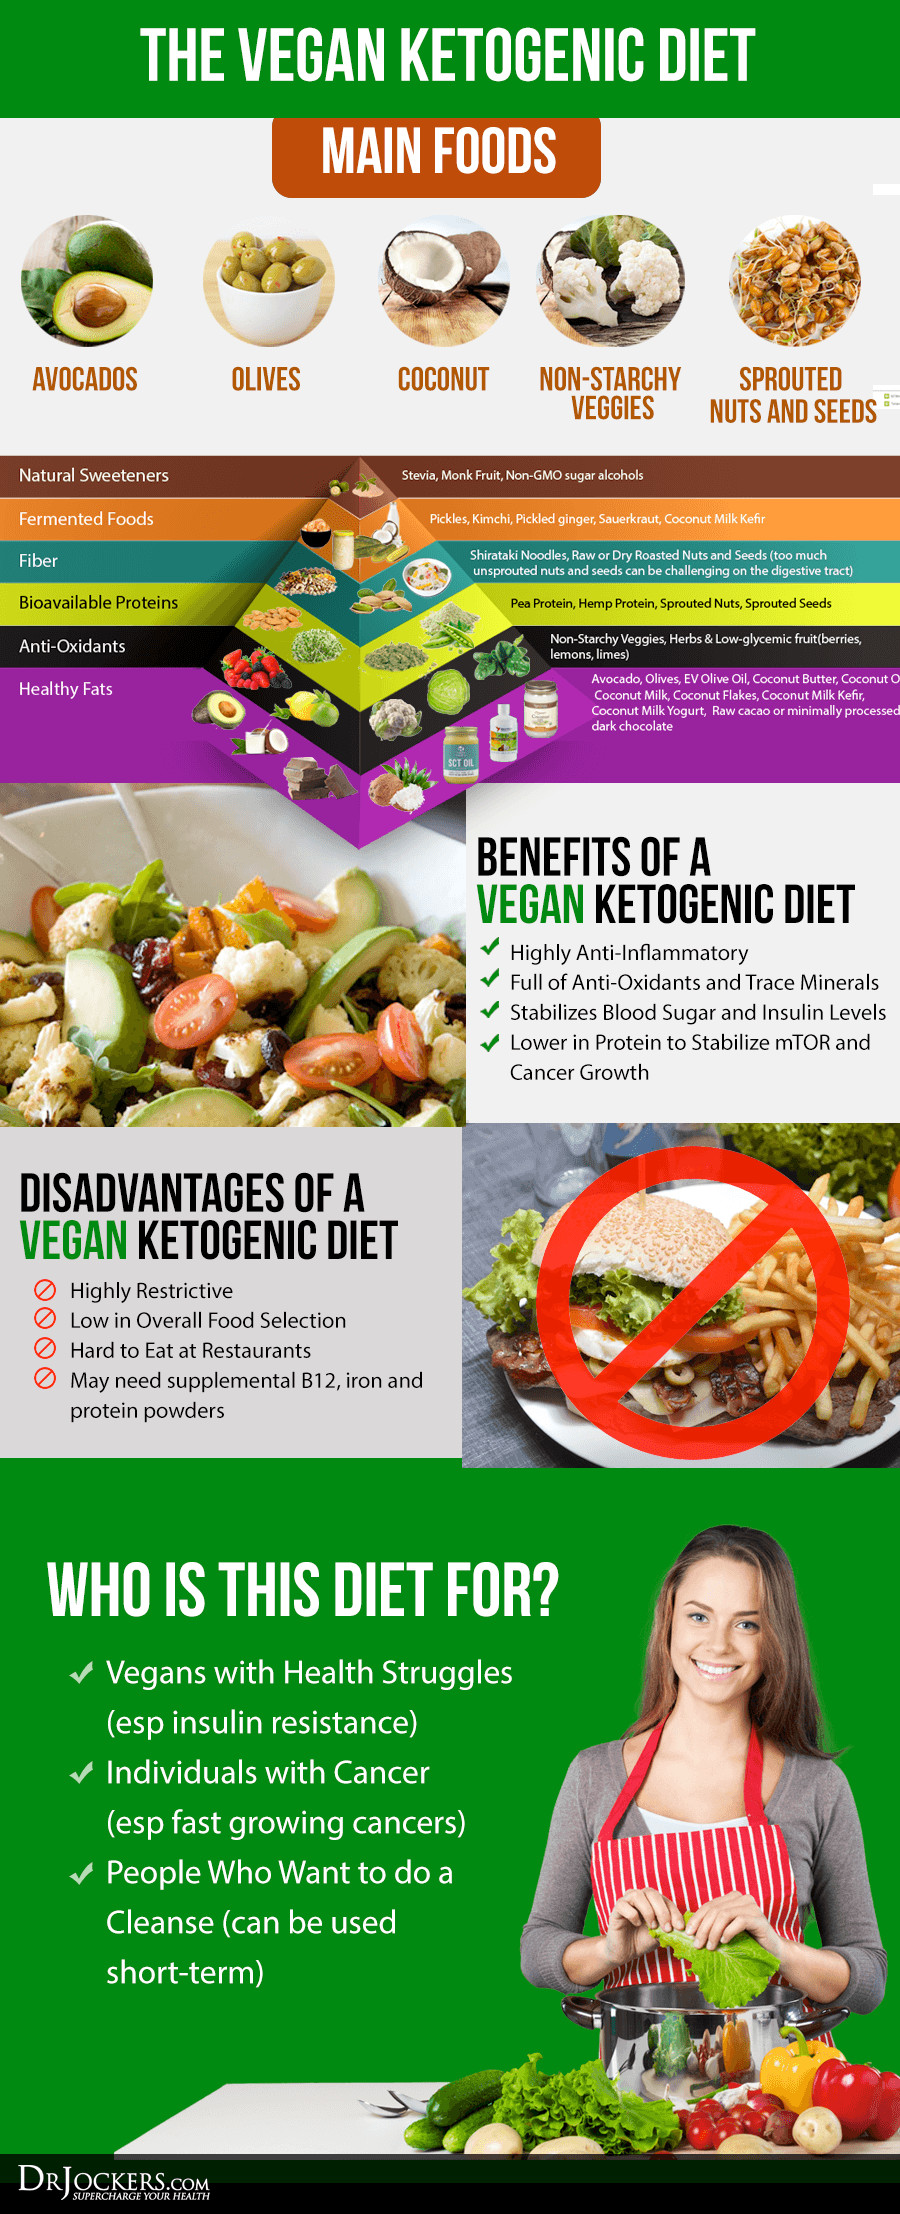 Vegetarian Keto Before And After
 How To Follow A Vegan Ketogenic Diet DrJockers